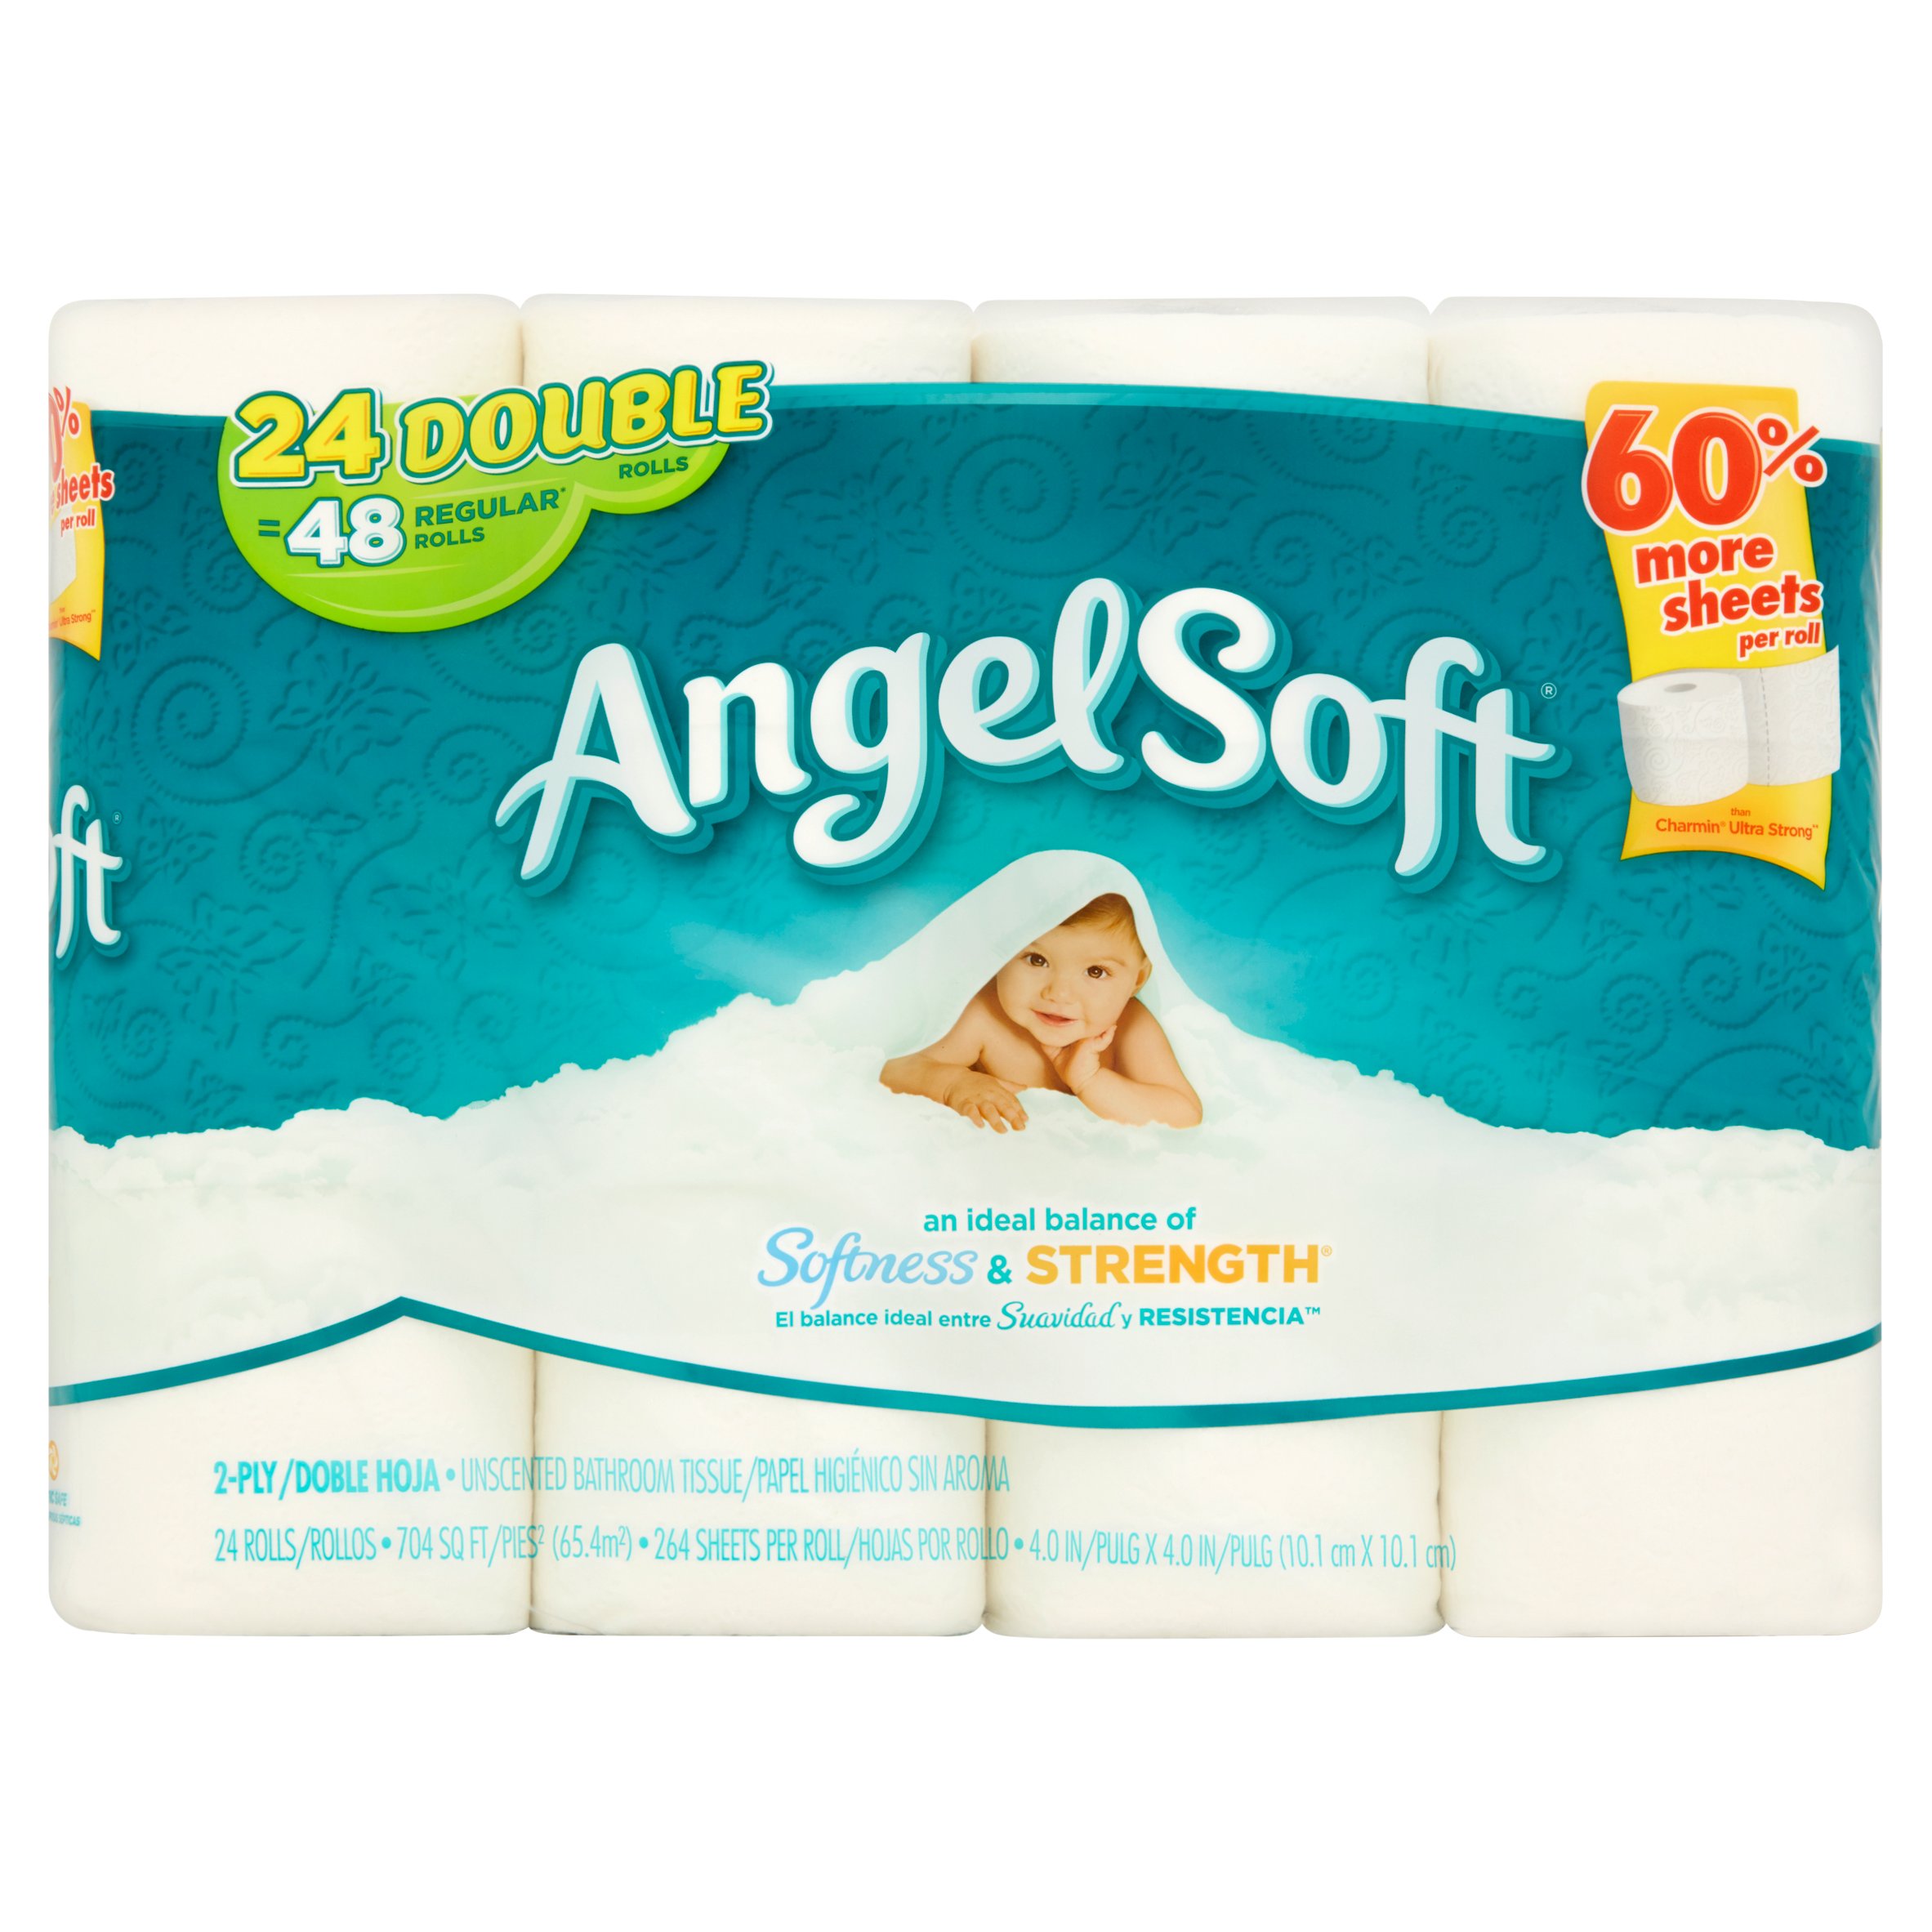 New $0.75/1 Angel Soft tissue paper printable coupon